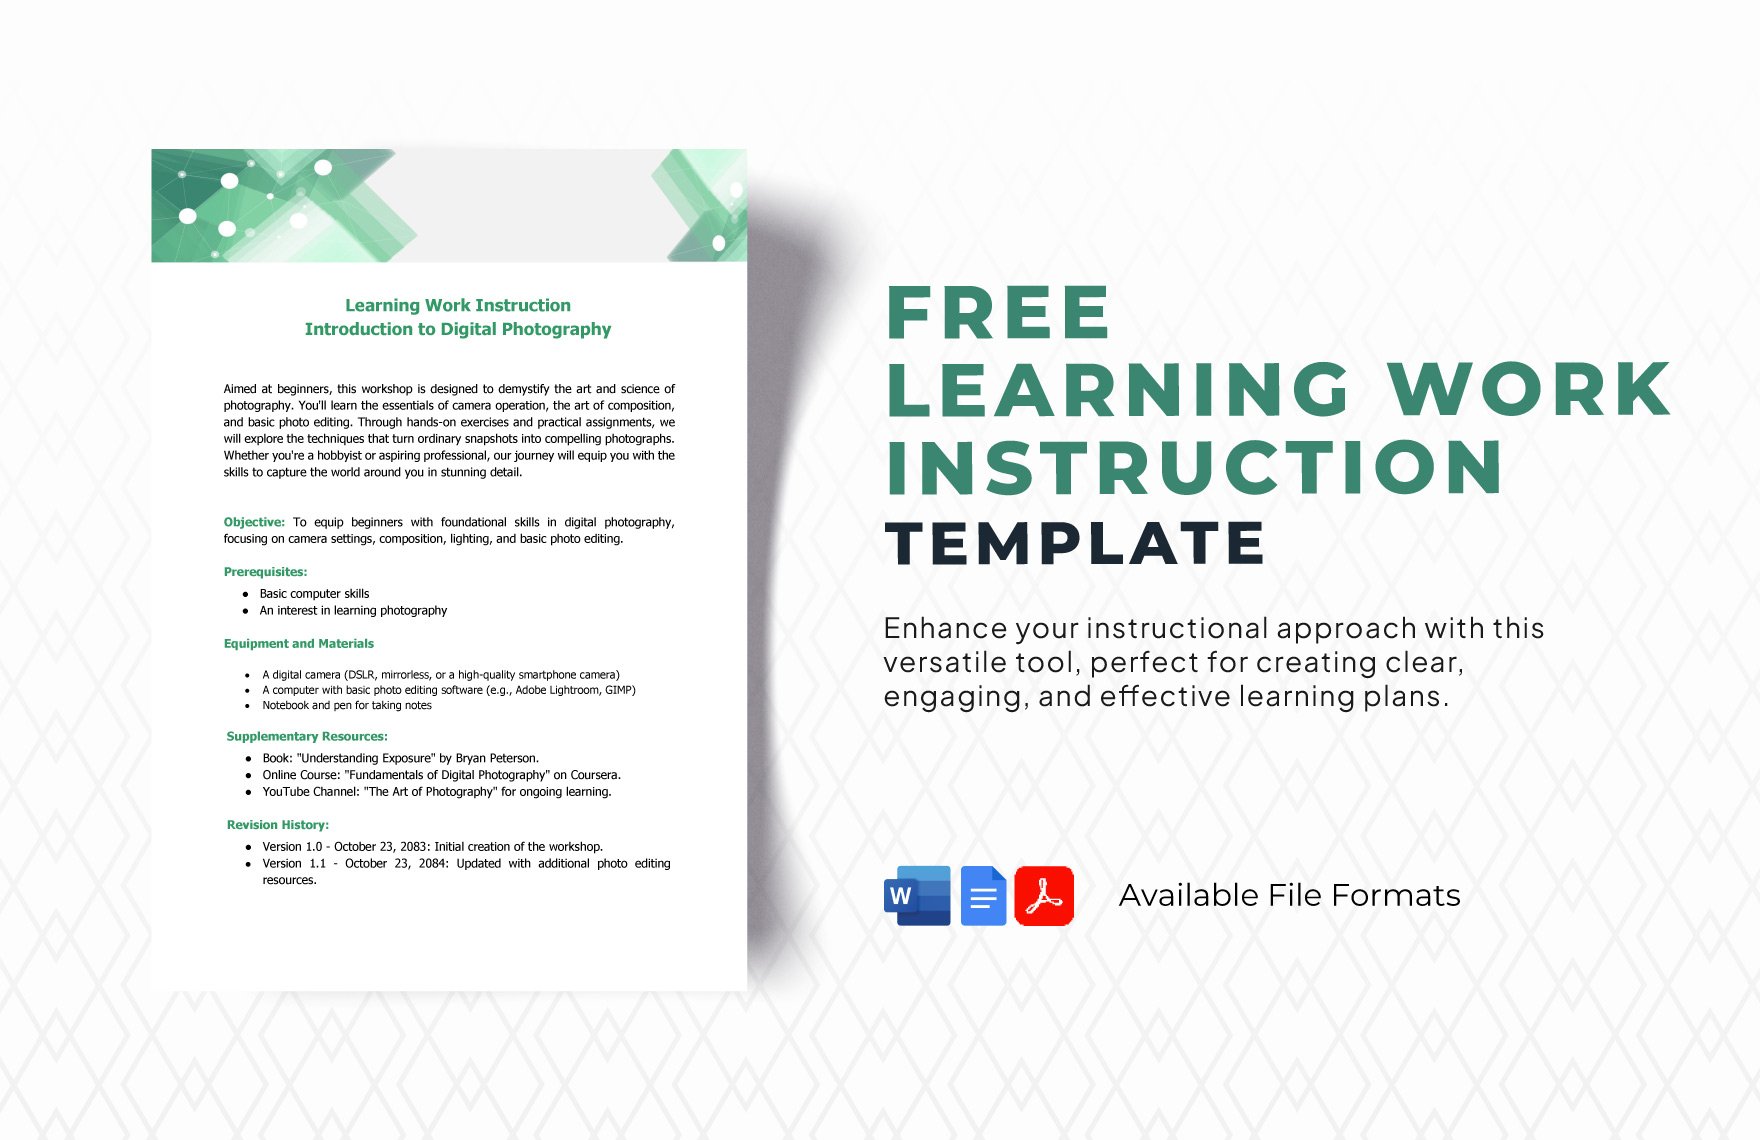 Free Learning Work Instruction Template in Word, Google Docs, PDF